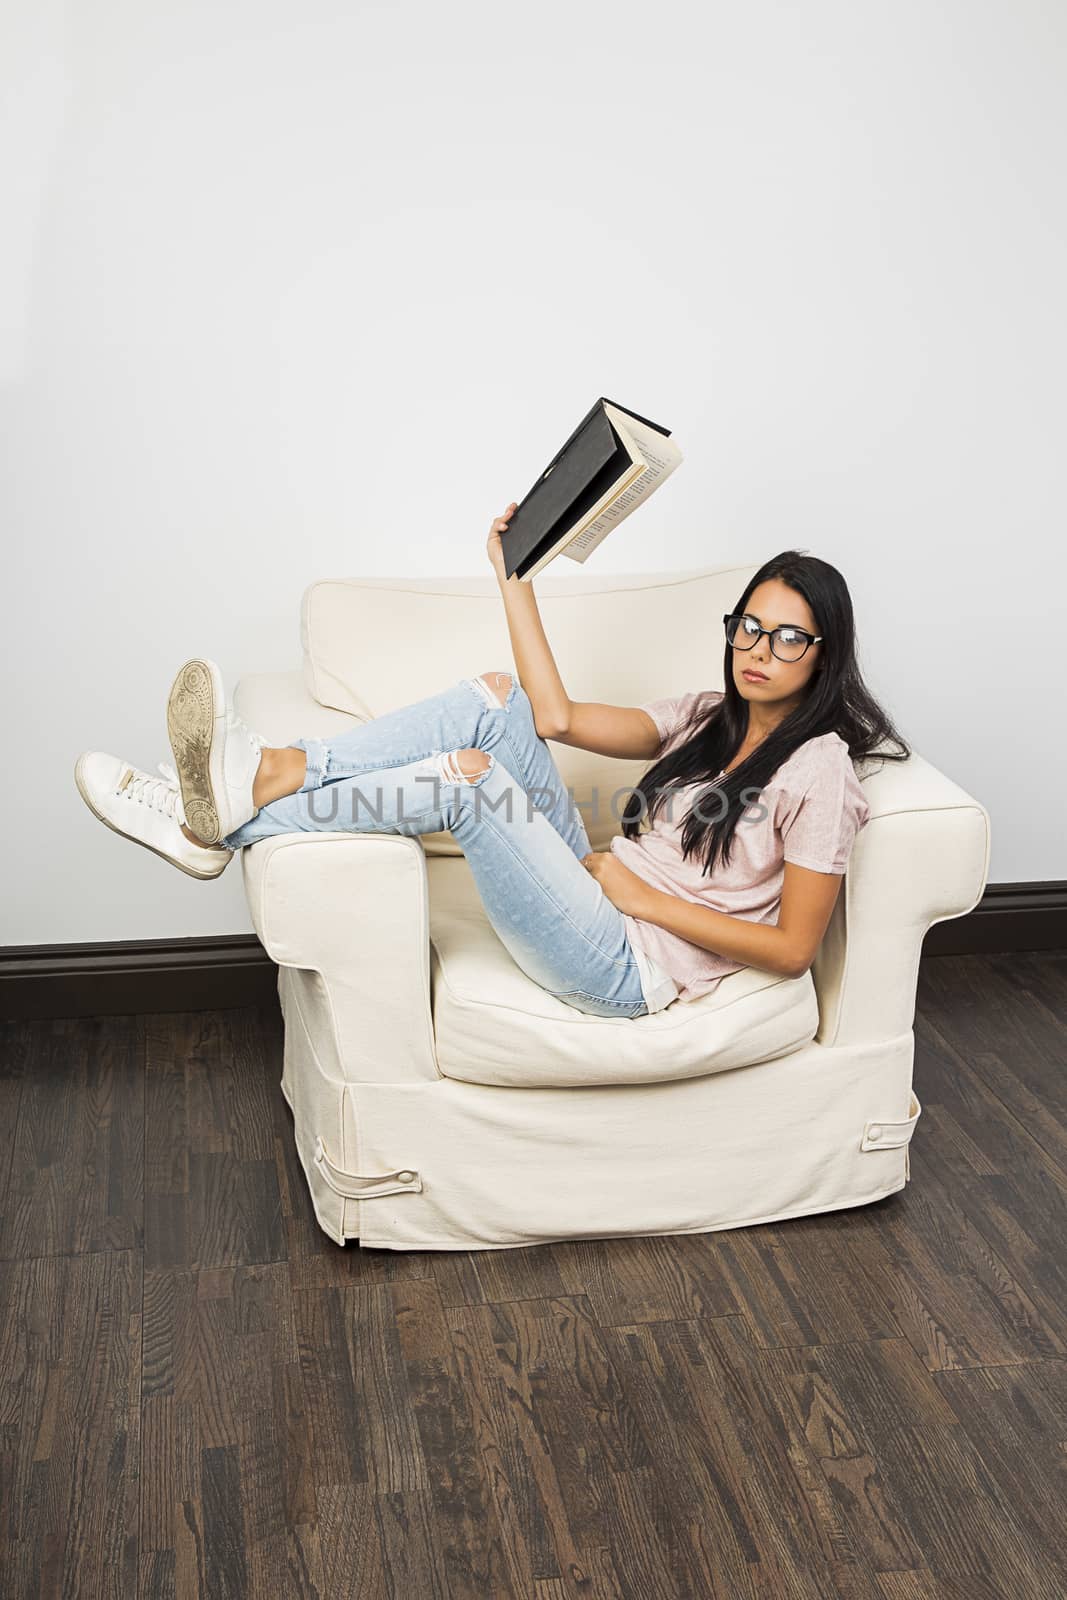 twenty something sitting on a couch with leg up, reading a book
